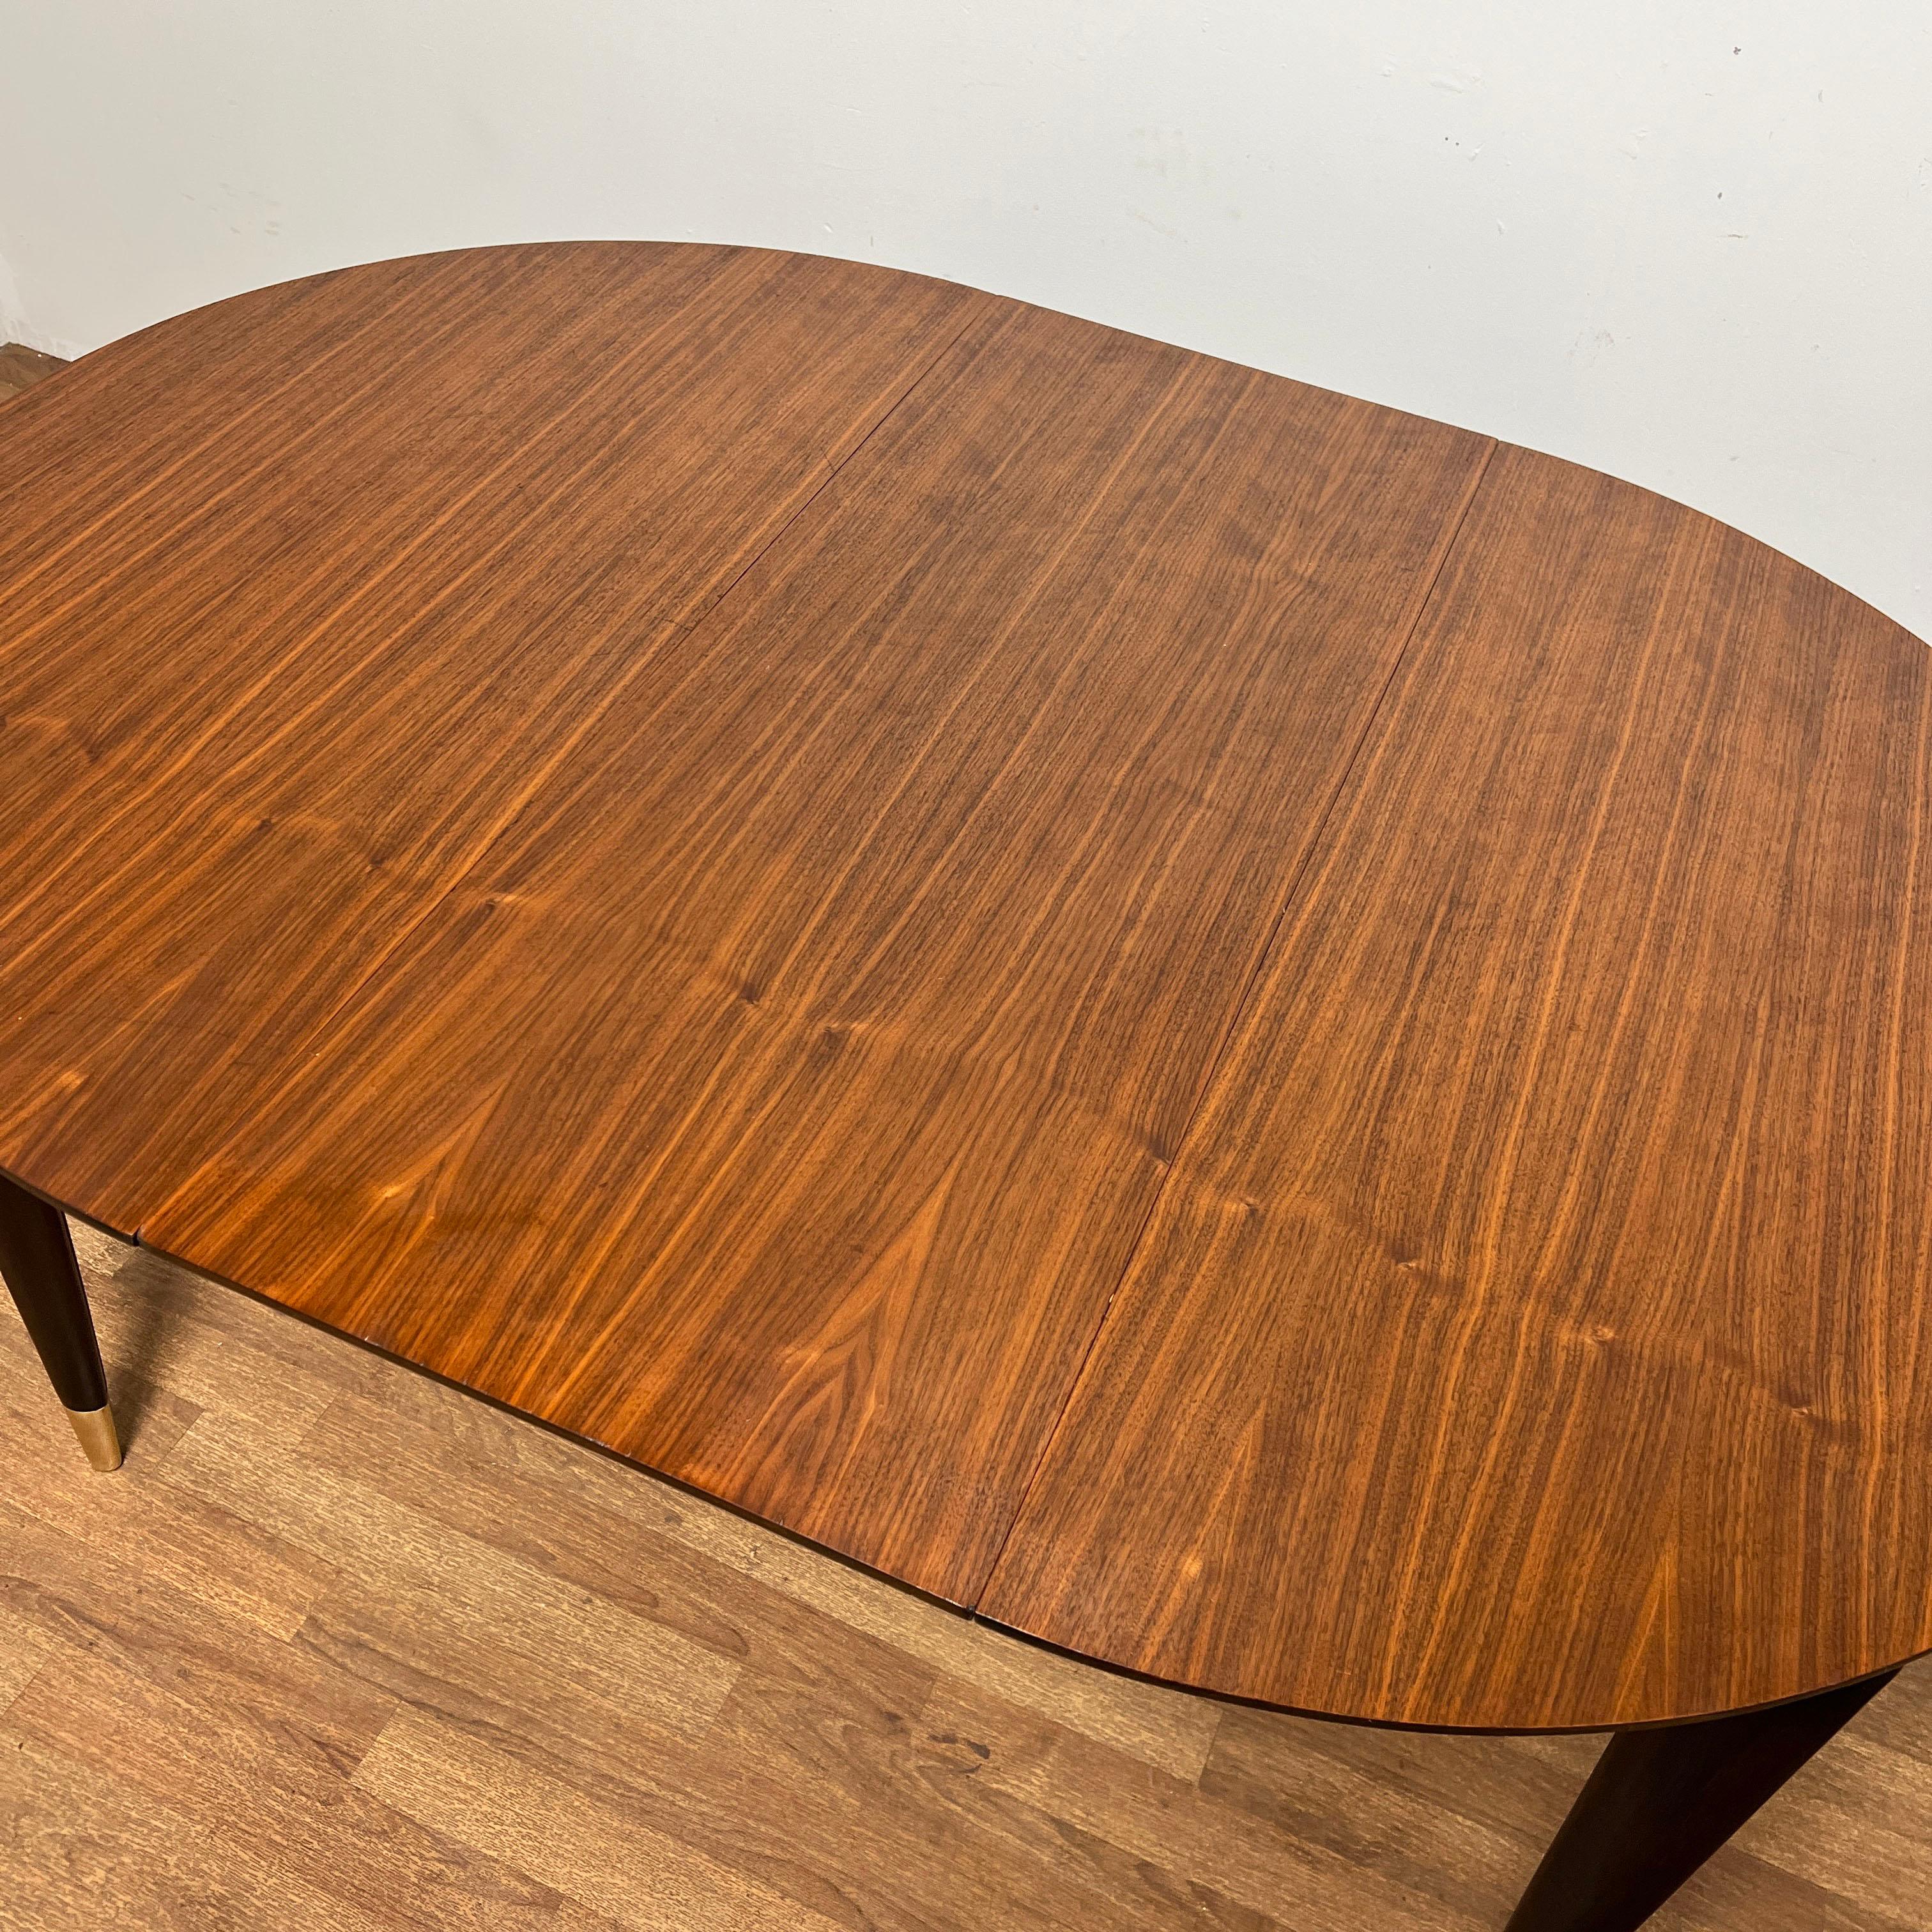 American Gio Ponti for Singer Dining Table in Walnut With Brass Sabots Circa 1950s For Sale